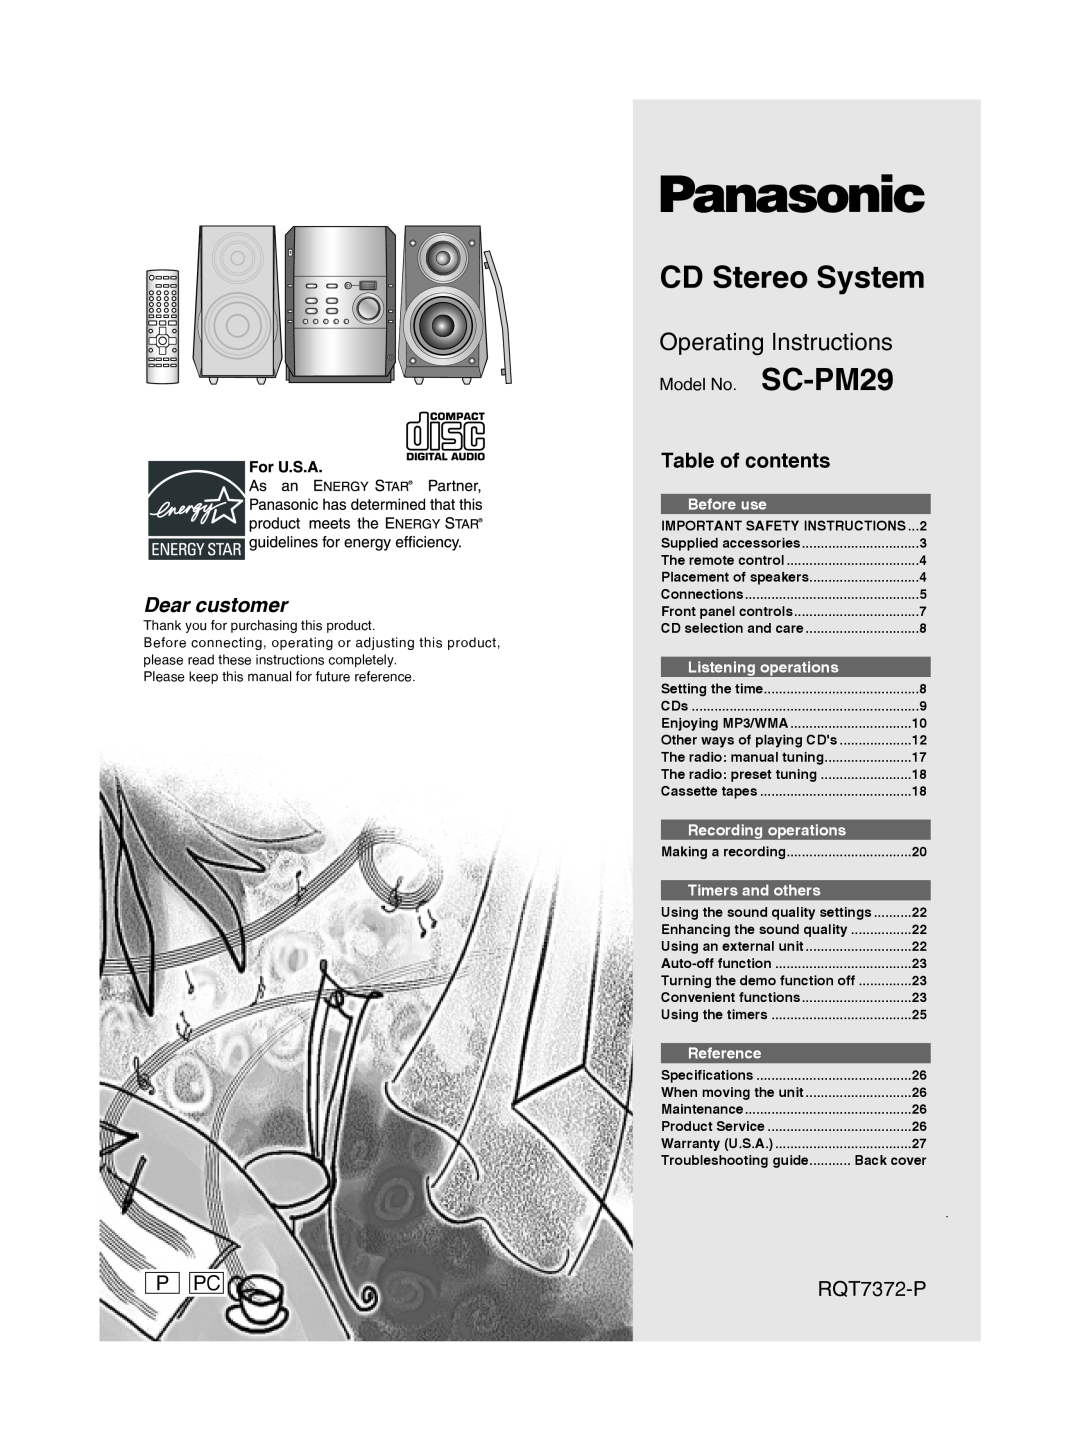 Panasonic important safety instructions P Pc, Table of contents, RQT7372-P, Model No. SC-PM29, CD Stereo System 